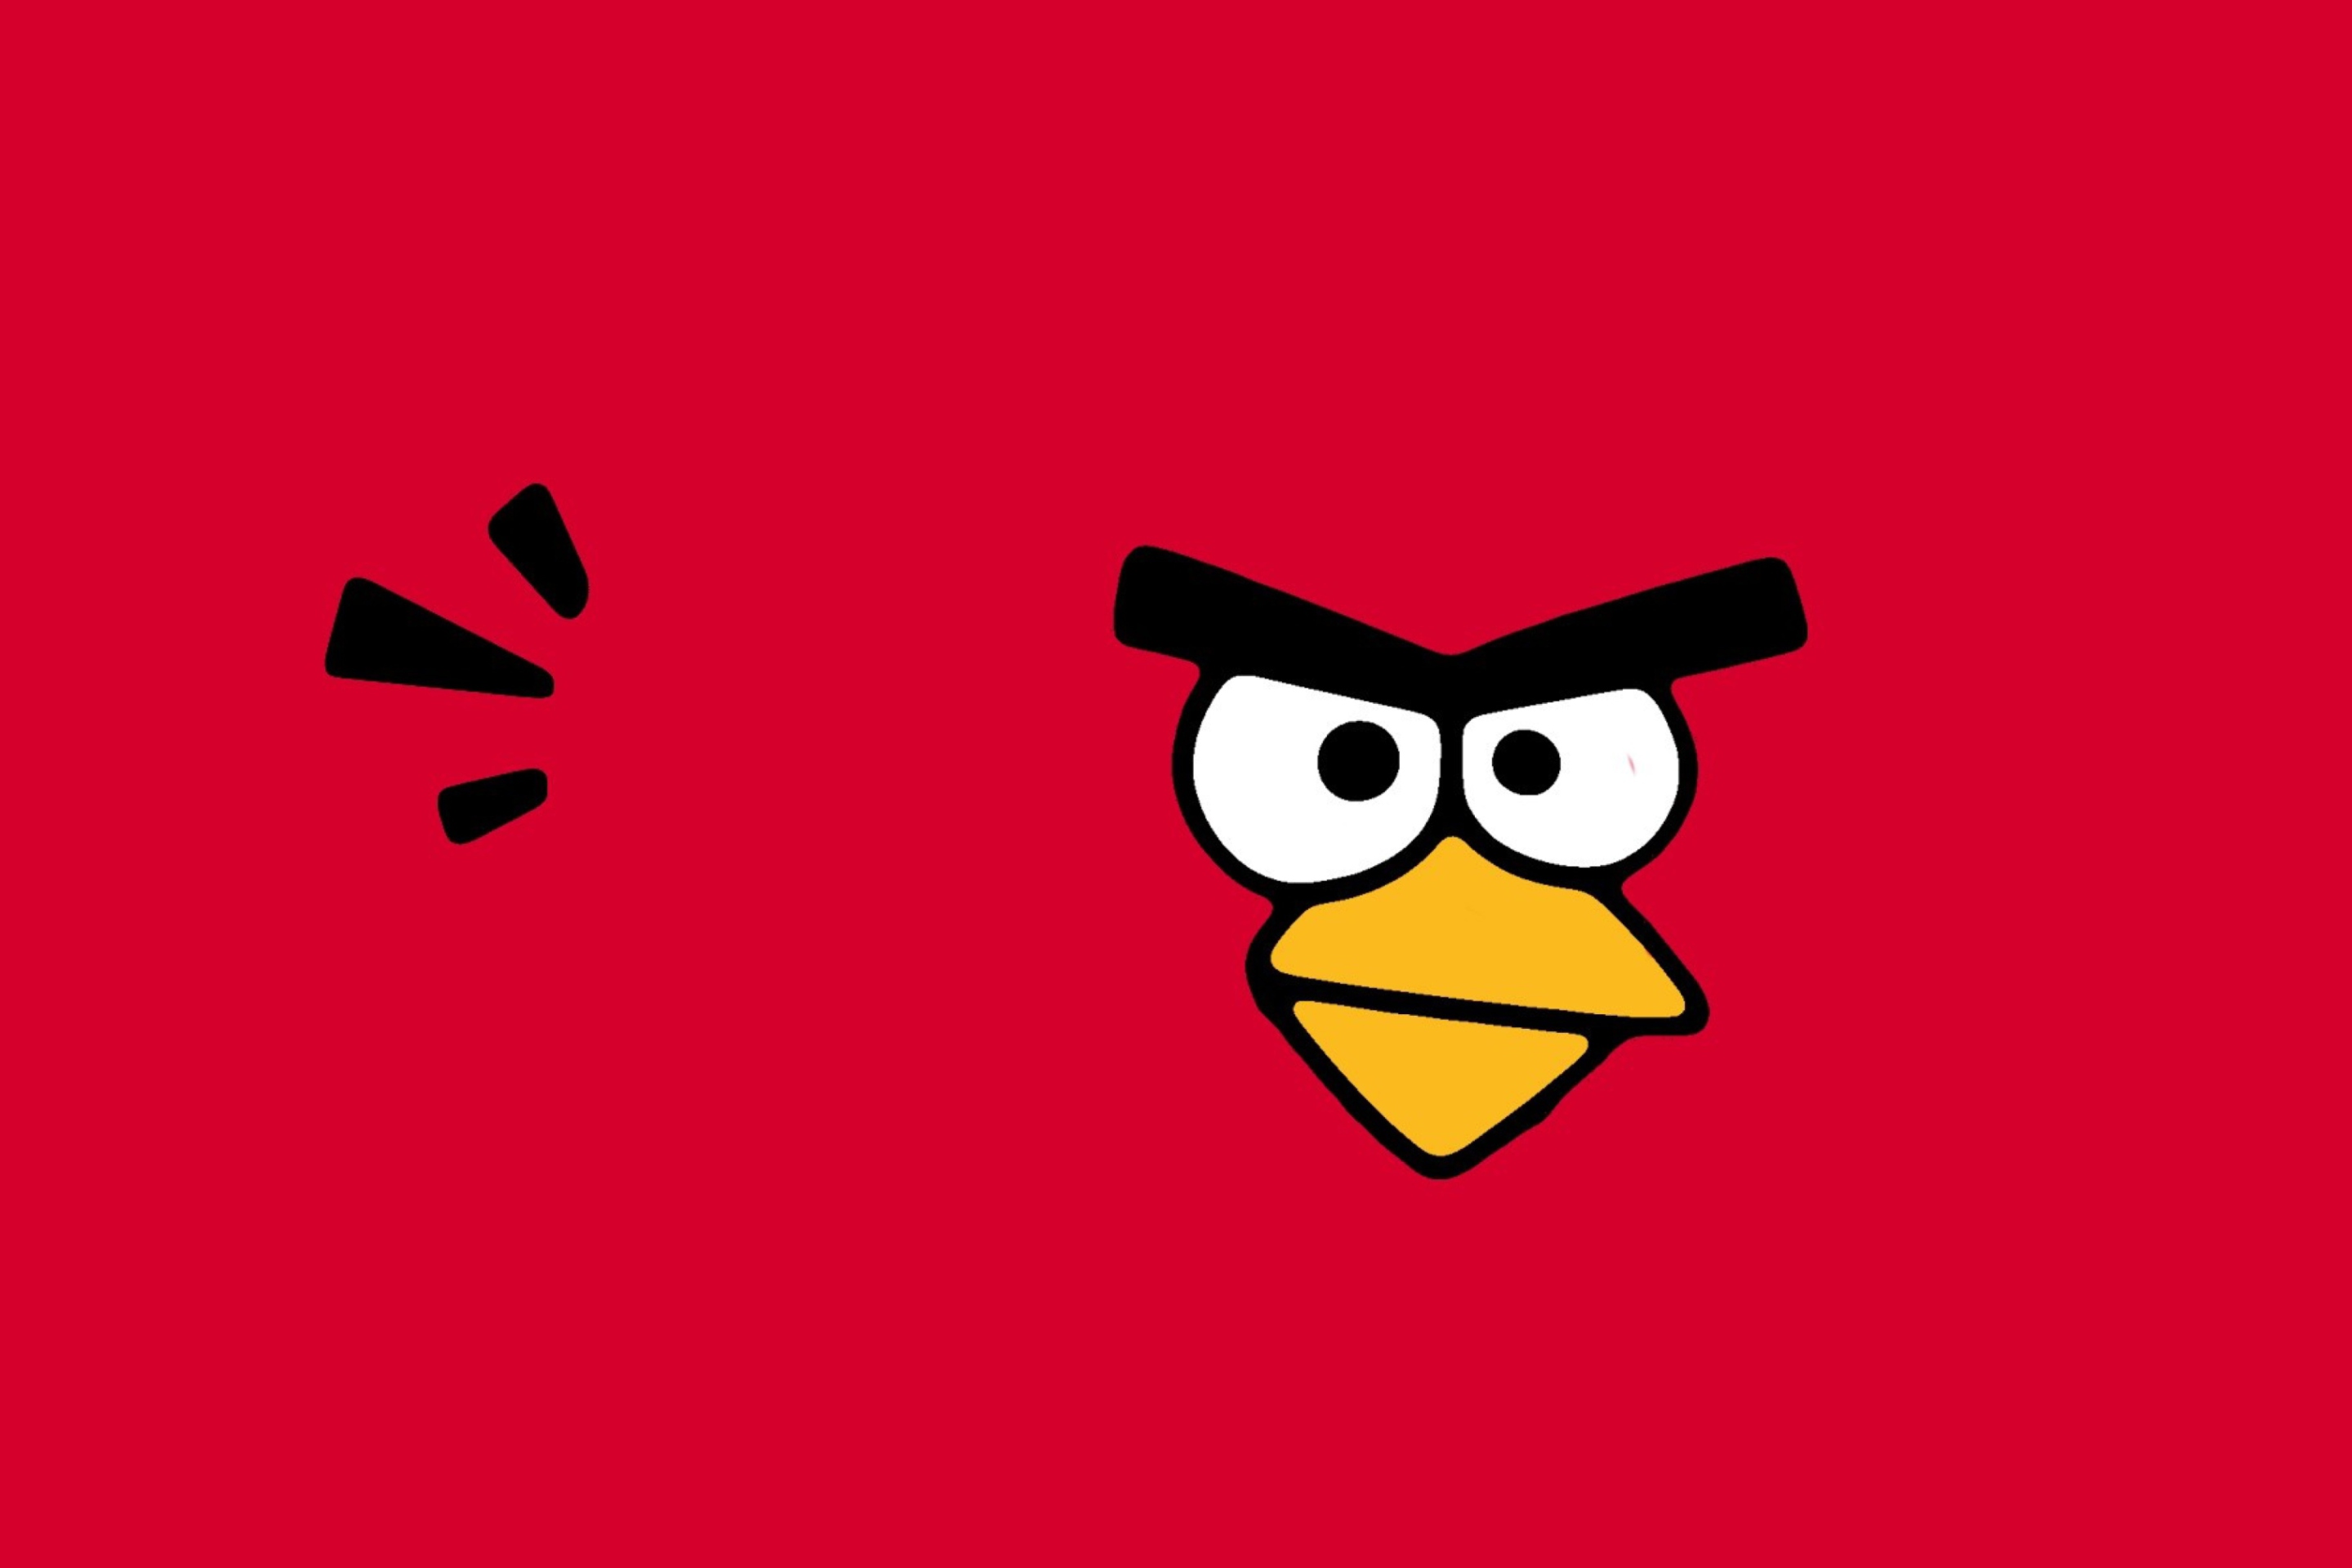 Red Angry Bird wallpaper 2880x1920